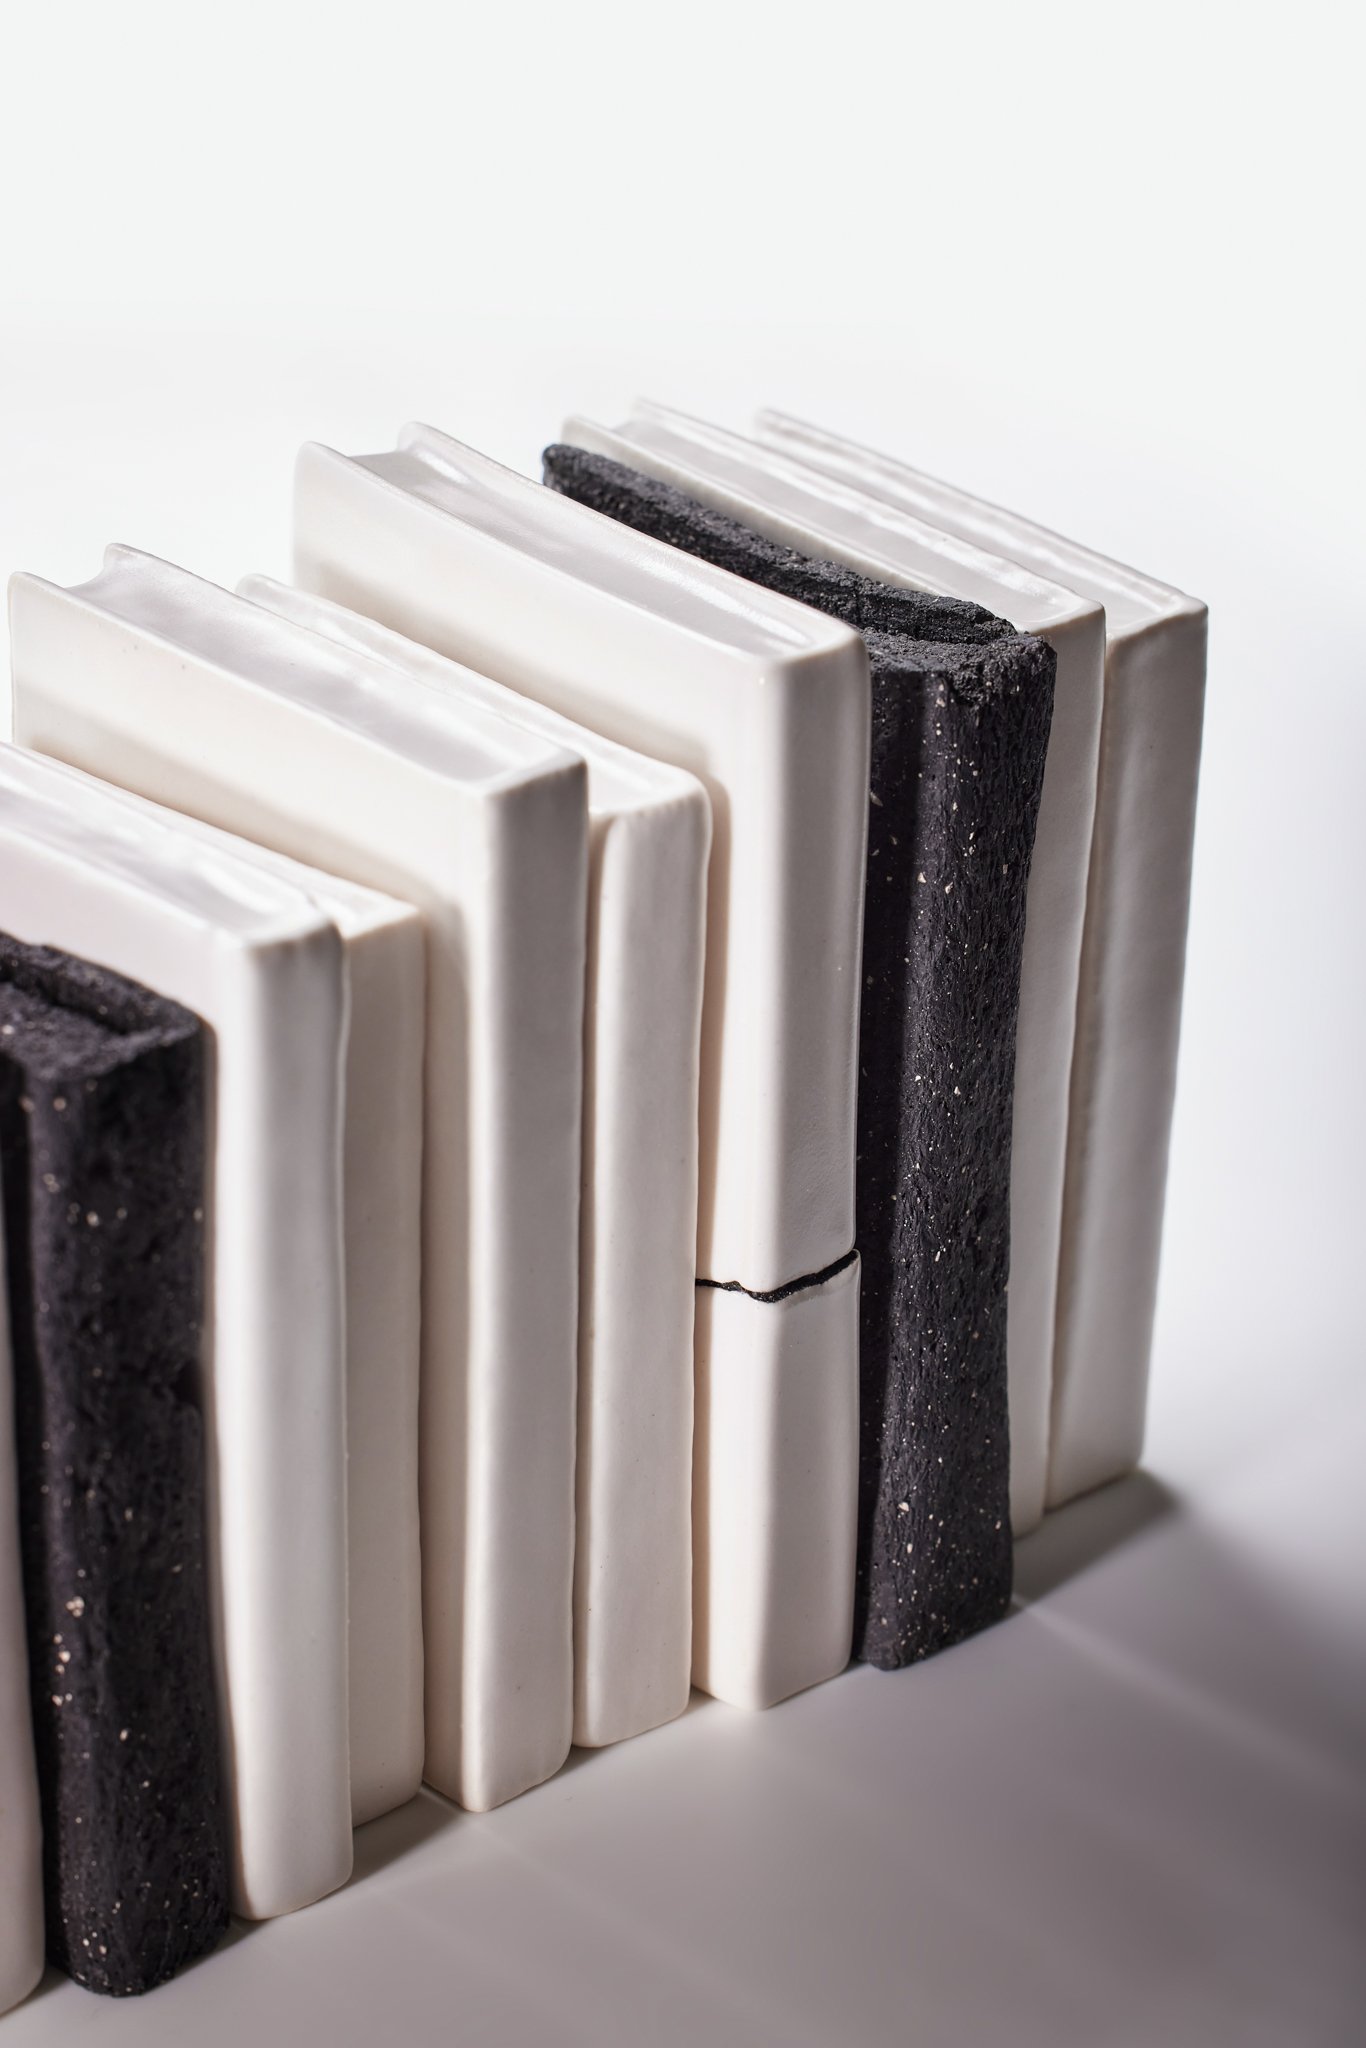 Where They Burn Books (photo 5), Dan Elborne 2021. Porcelain, glaze, paper ash & gold lustre. Photo by Aaron Mcauley. Courtesy of the artist and Onespace Gallery Brisbane.jpg